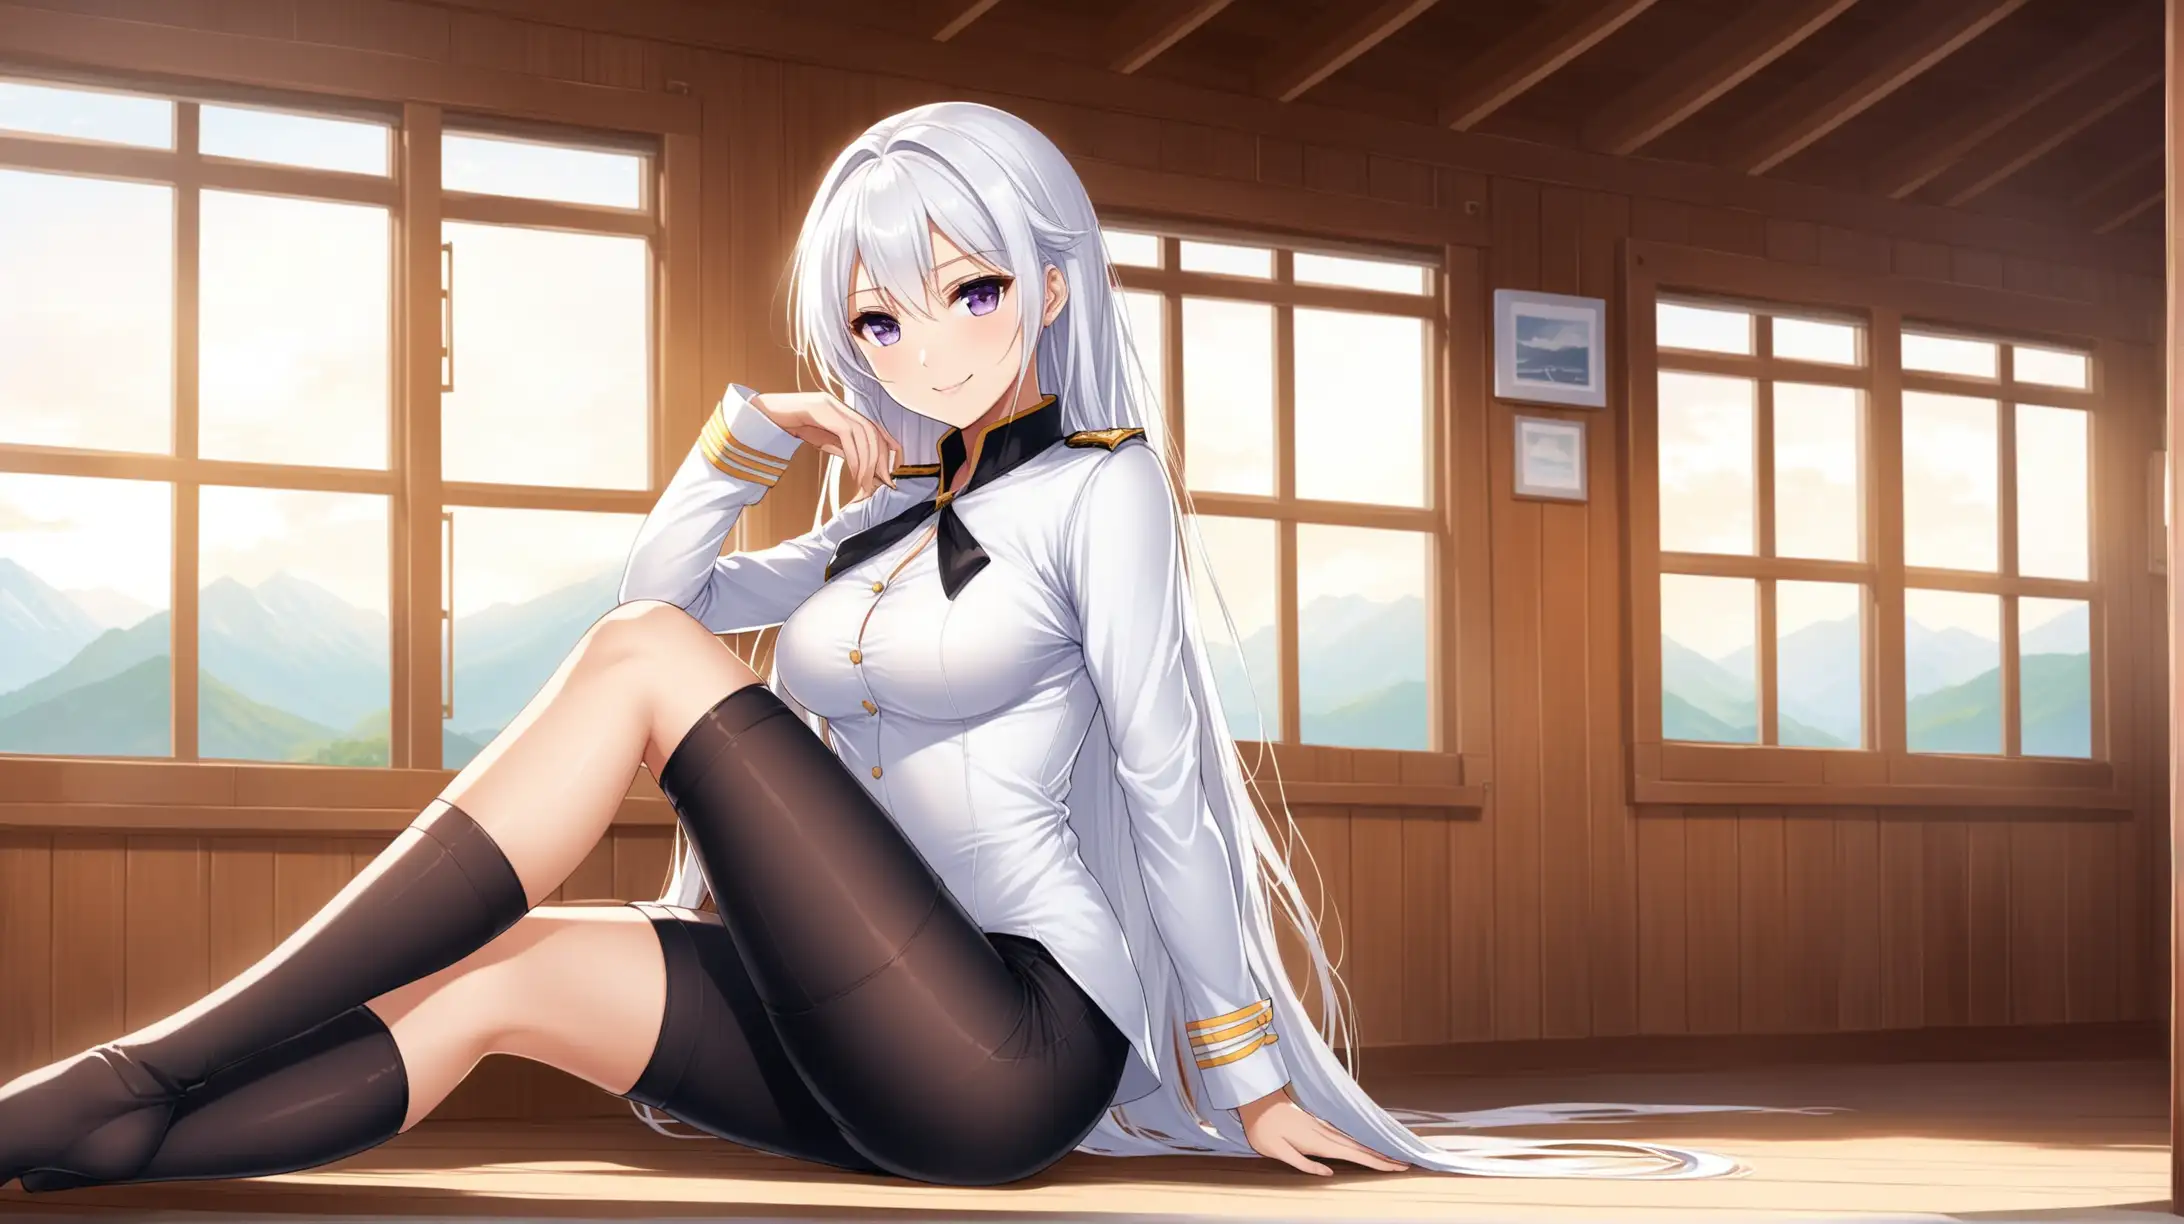 Seductive Pose of Enterprise from Azur Lane in Relaxed Cabin Setting